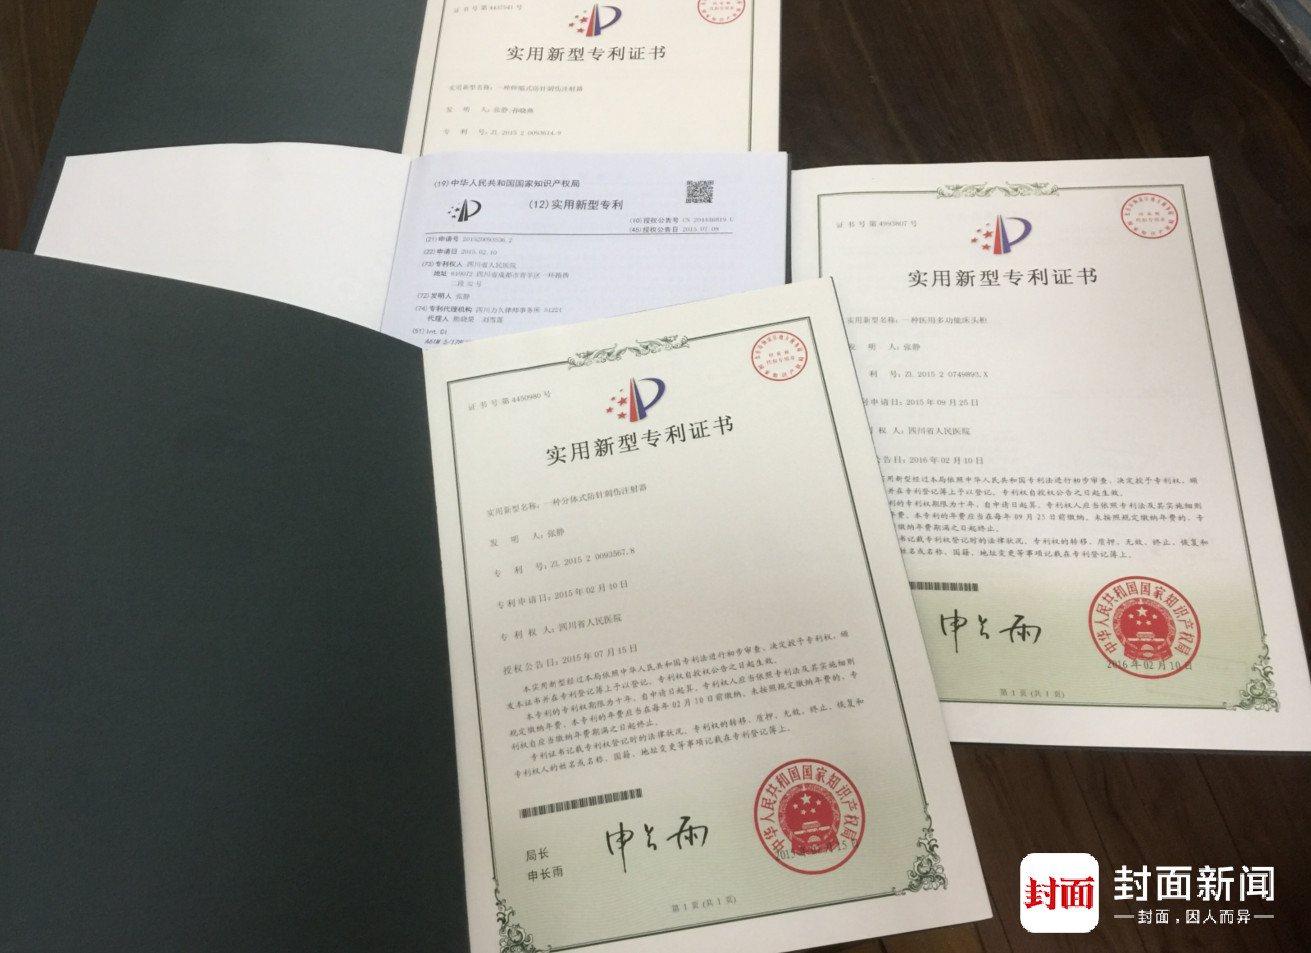 Zhang Jing’s certified patents. [Photo: West China City Daily]